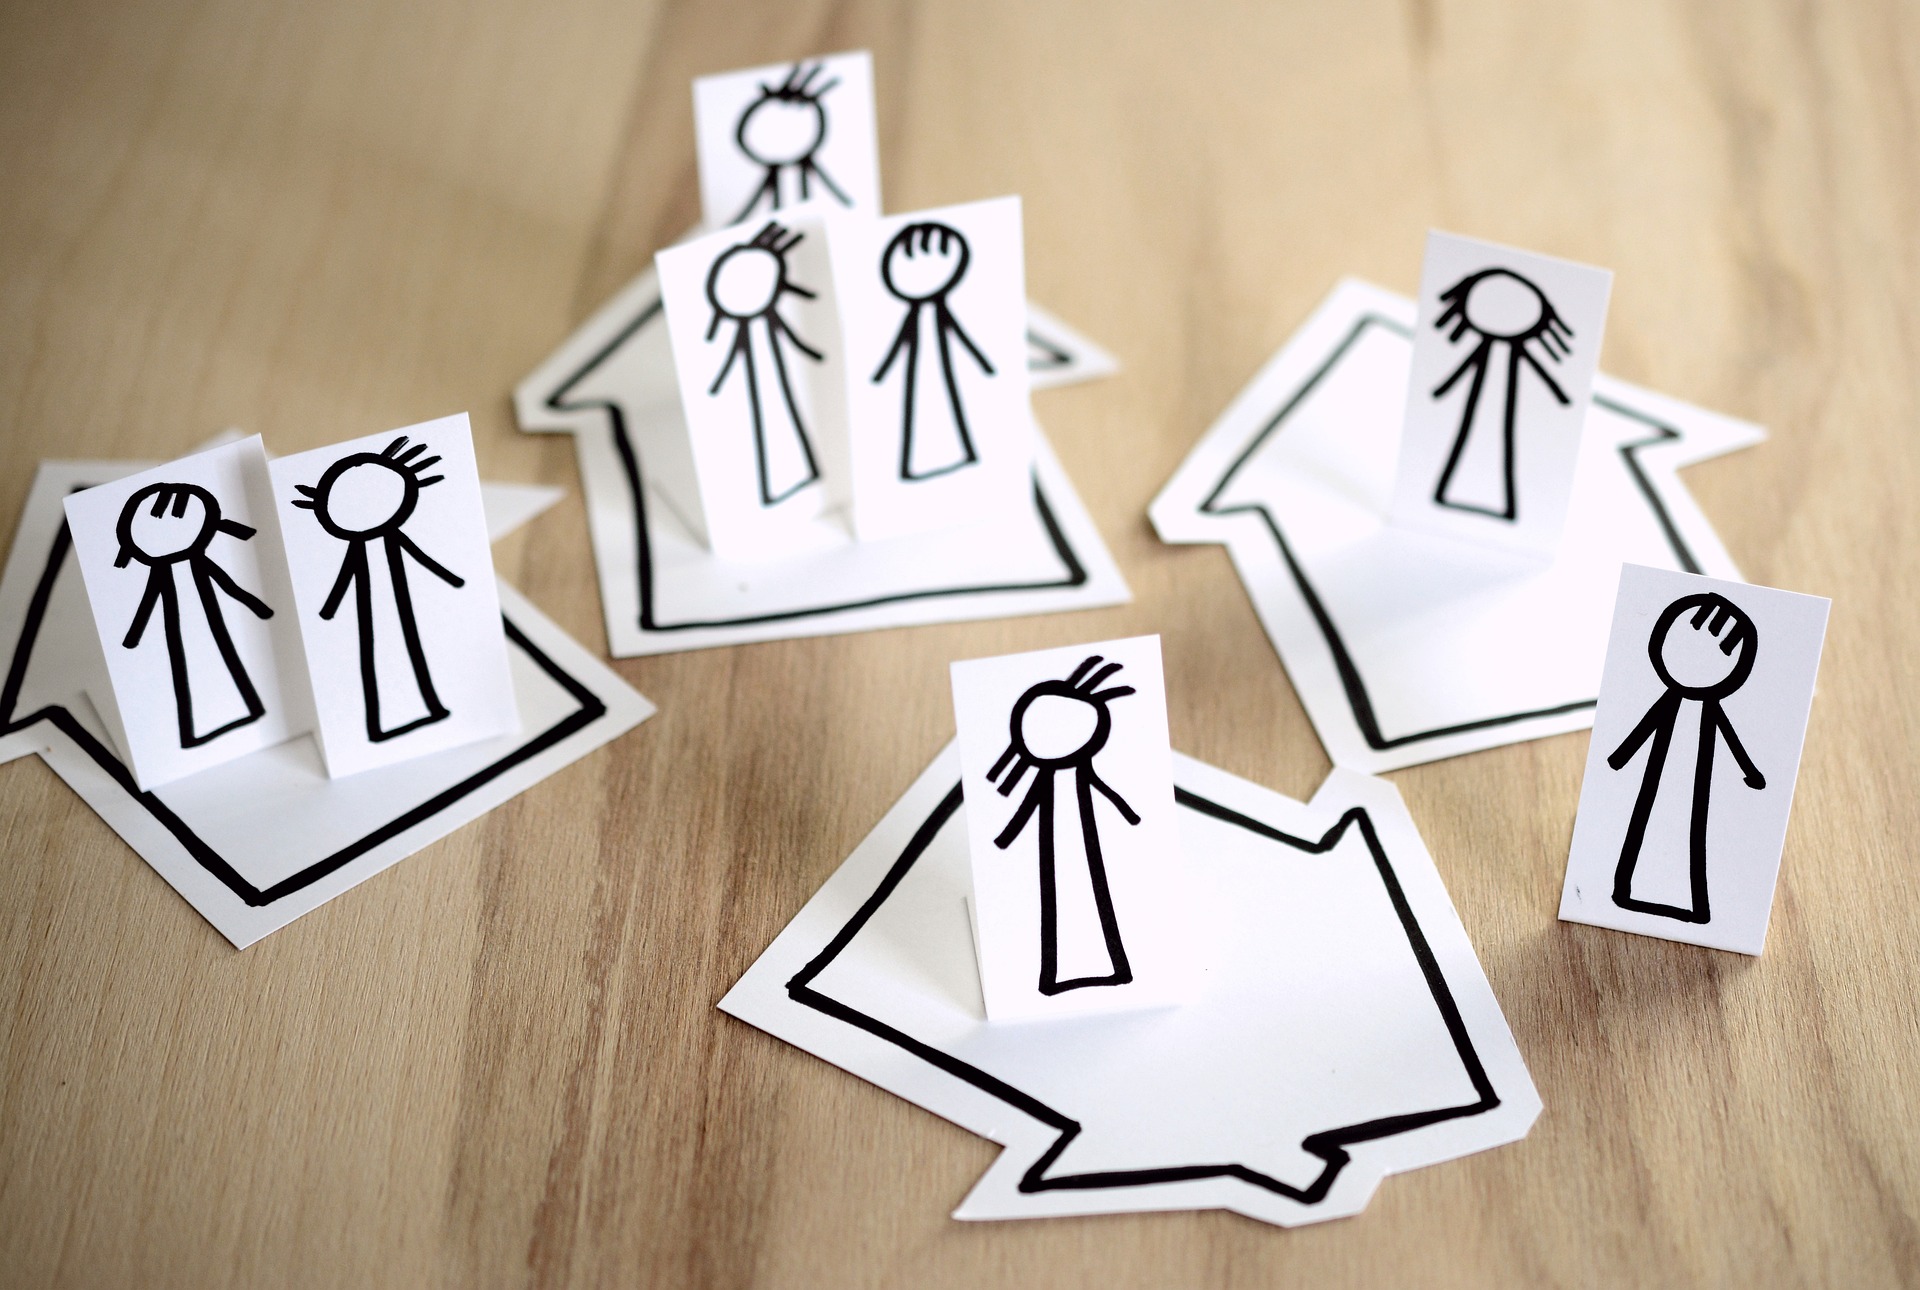 Paper cut outs of people on paper house cut outs; our Probate Solicitors in Preston are able to assist with estate administration.